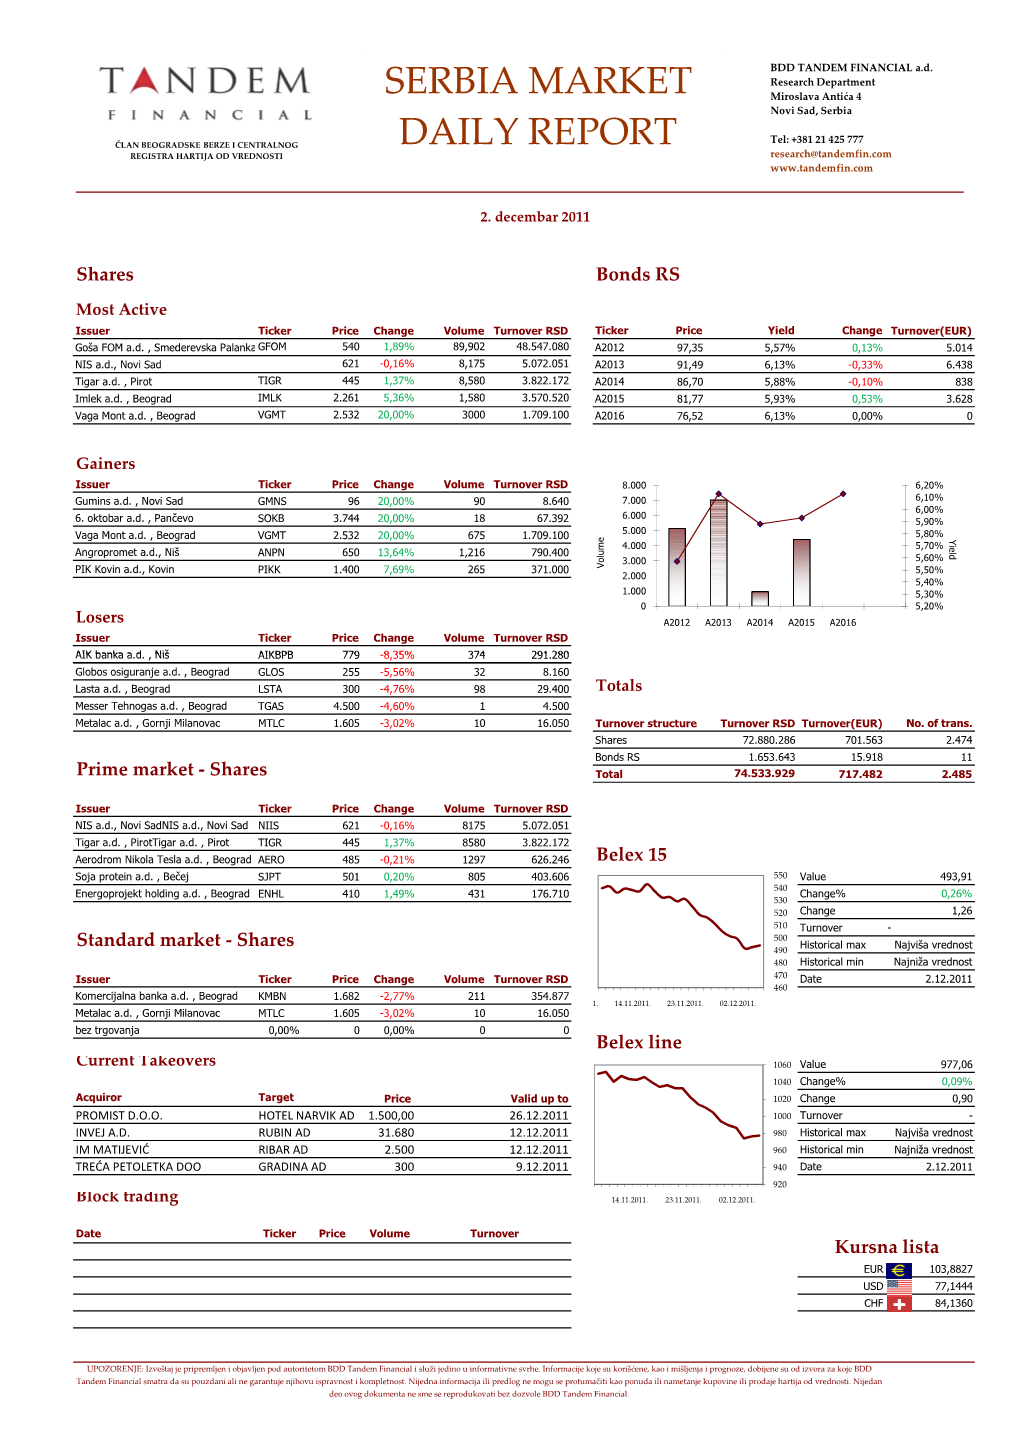 Serbia Market Daily Report